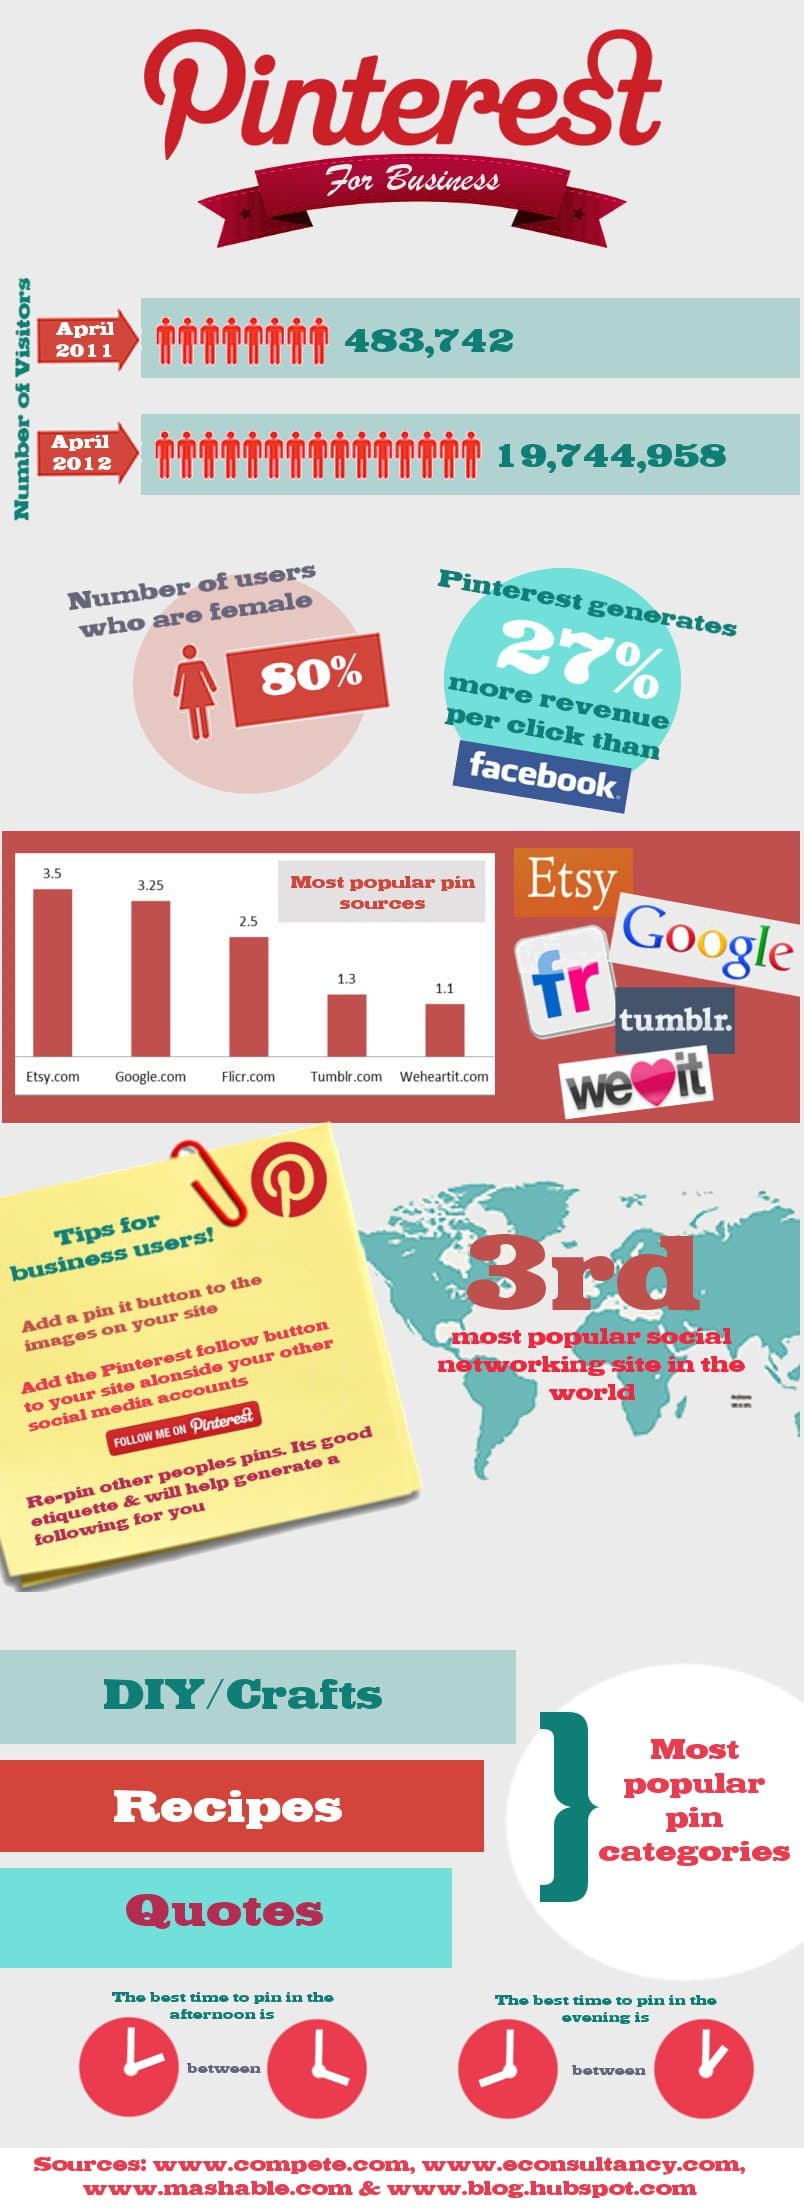 The Best Time To Get Pinning On Pinterest [Infographic]